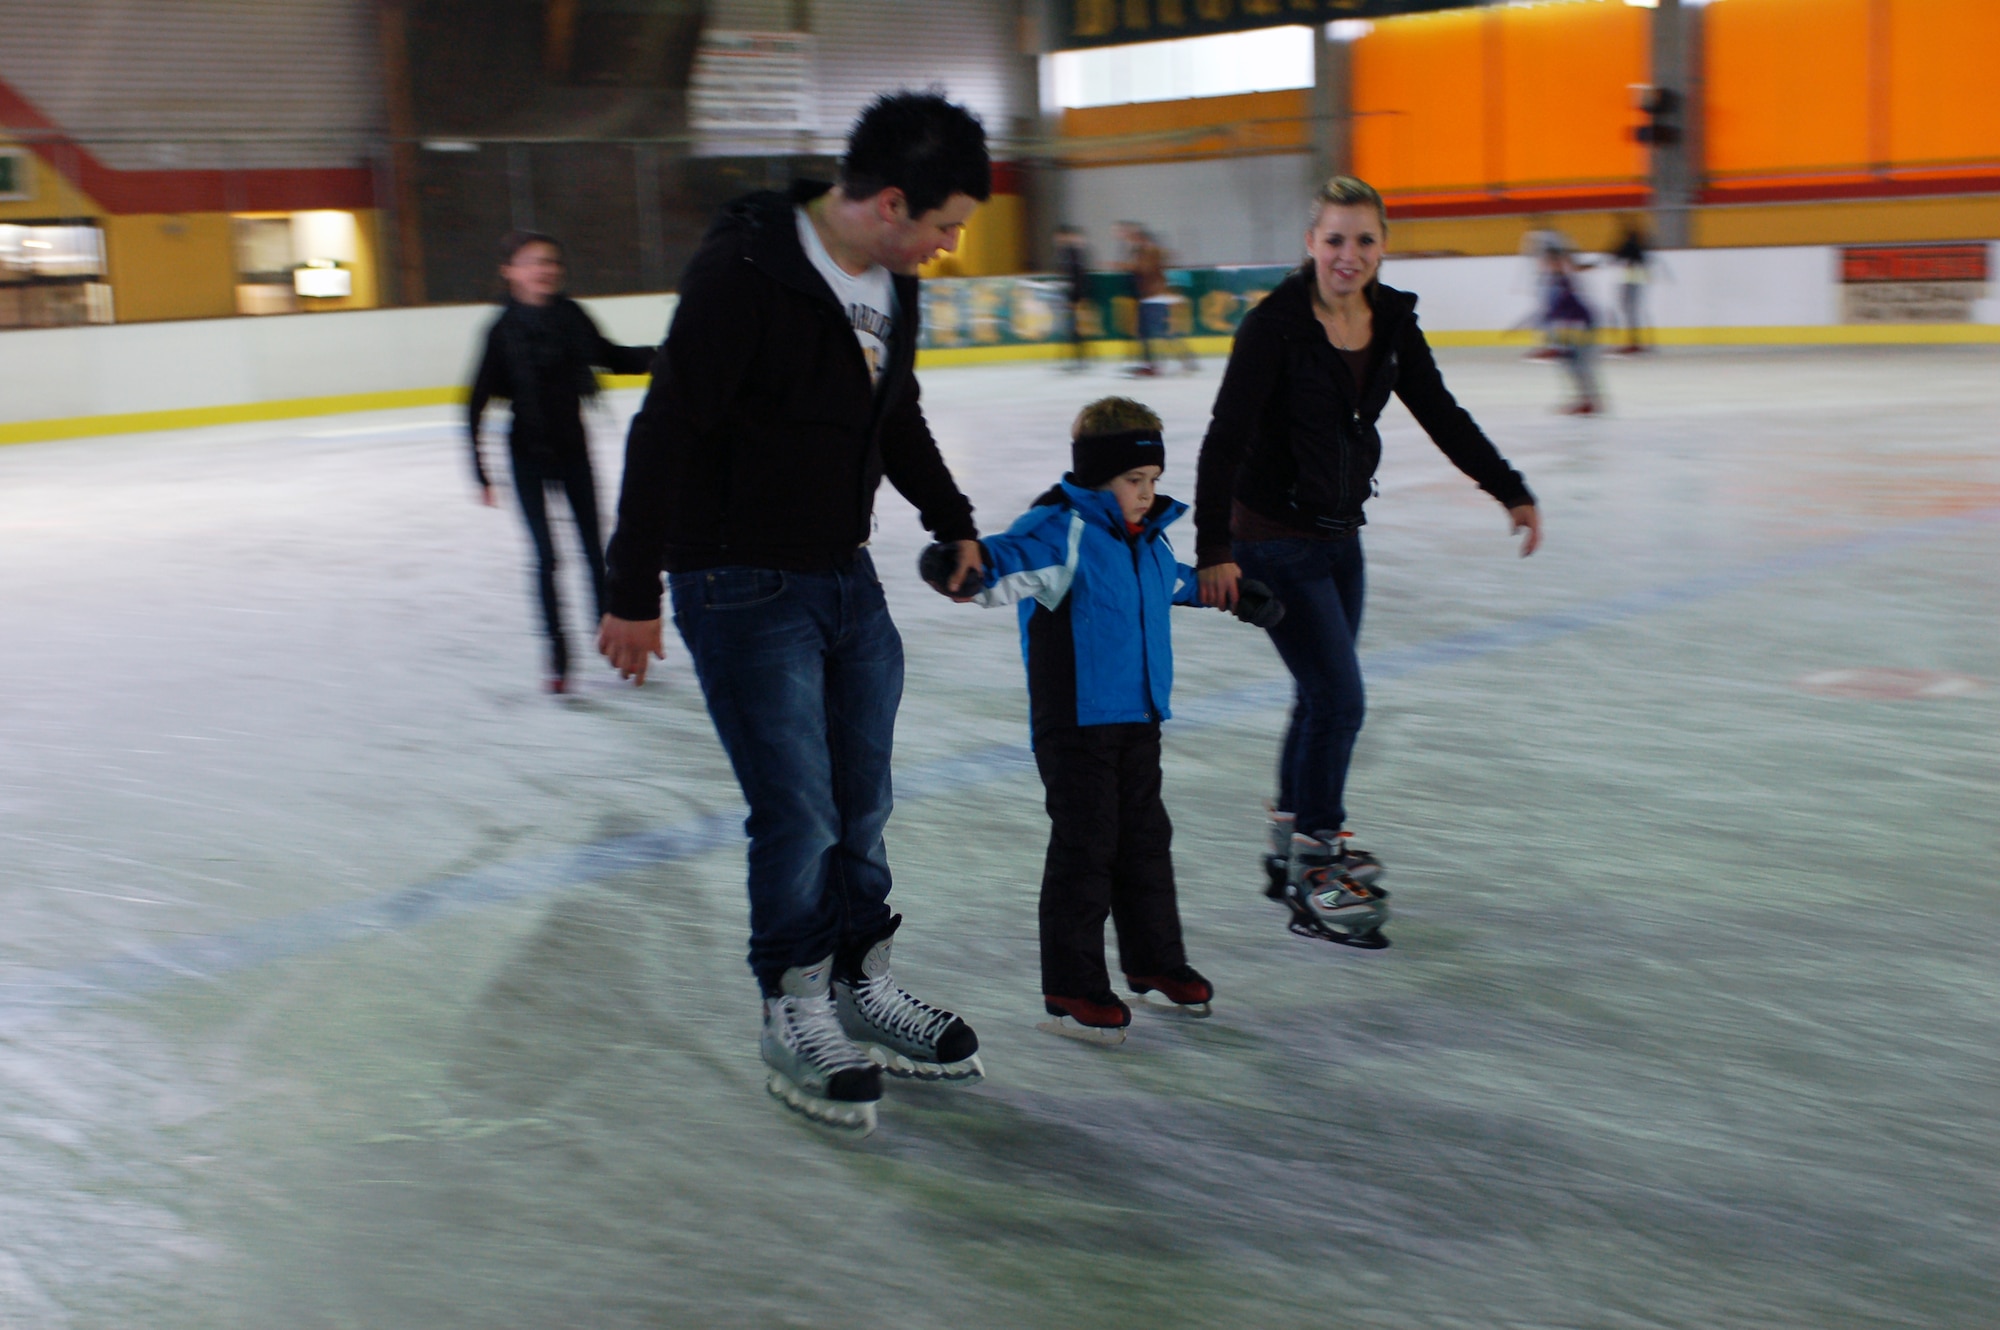 BITBURG, Germany -- A local family ice skates Sunday, which is Family Day, when families are eligible to receive price reductions 10 a.m. - 1 p.m. at the Bitburg ice rink. The family price is four Euros per adult and one Euro per child. Skate rental is three Euros per adult and one Euro per child for the first three children, and it is two Euros per child for any additional child. Two ice rinks can be found in the Eifel area, one of which is in Trier, and one (as shown in the photo) is located right outside the former base in Bitburg.  The Bitburg ice rink is now open for the 2010 season and will remain open until April 2011. (U.S. Air Force photo/Iris Reiff)